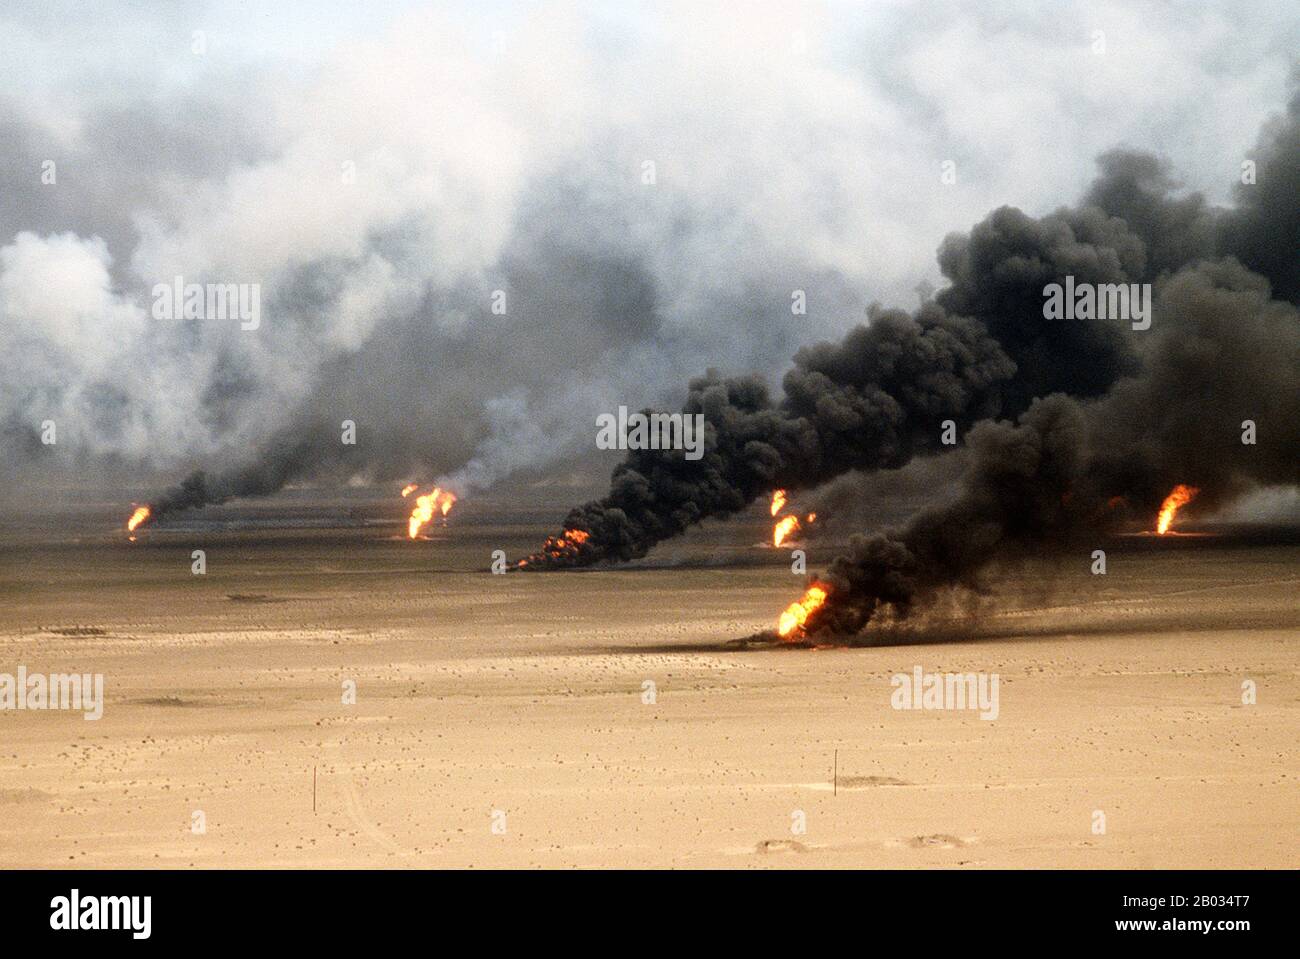 USAF photograph of  Kuwaiti oil fires, set by the retreating Iraqi army during Operation Desert Storm in 1991.  The Persian Gulf War (August 2, 1990 – February 28, 1991), commonly referred to as simply the Gulf War, was a war waged by a U.N.-authorized coalition force from thirty-four nations led by the United States, against Iraq in response to Iraq's invasion and annexation of the State of Kuwait.  This war is commonly known as Operation Desert Storm, the First Gulf War, Gulf War I, or the Iraq War. Stock Photo